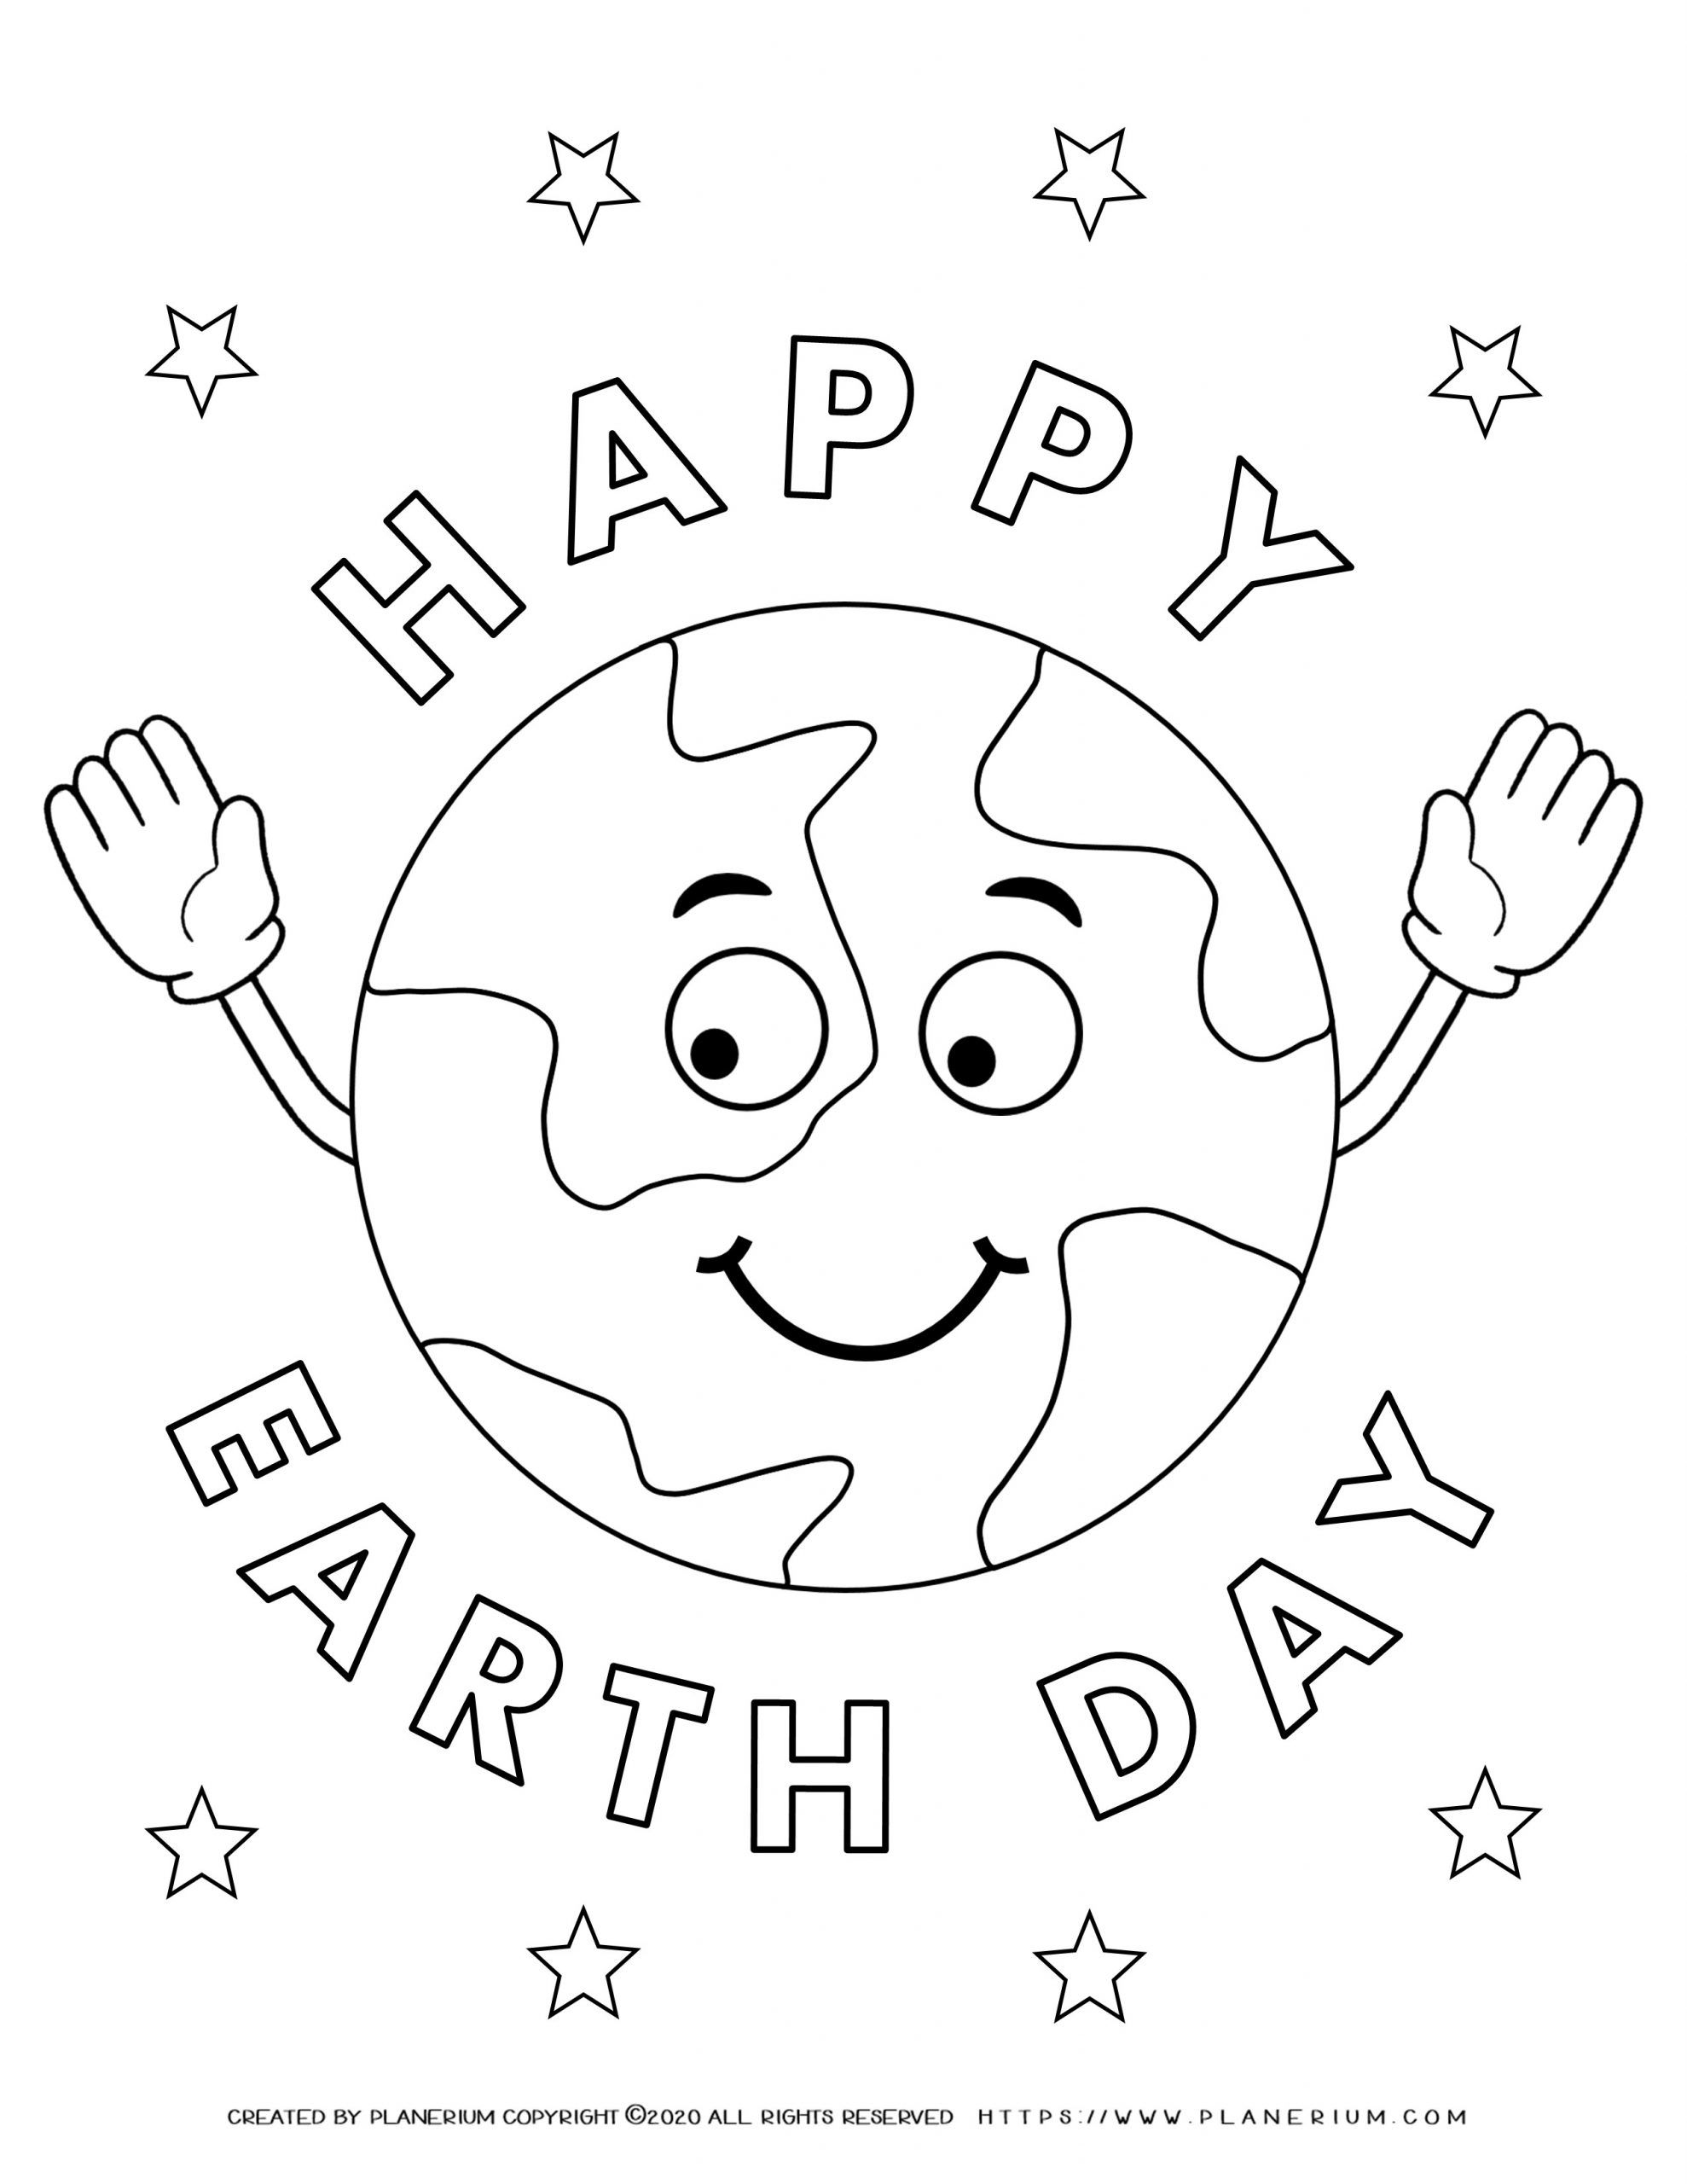 Earth Day - Coloring Page - Happy Earth Day | Planerium